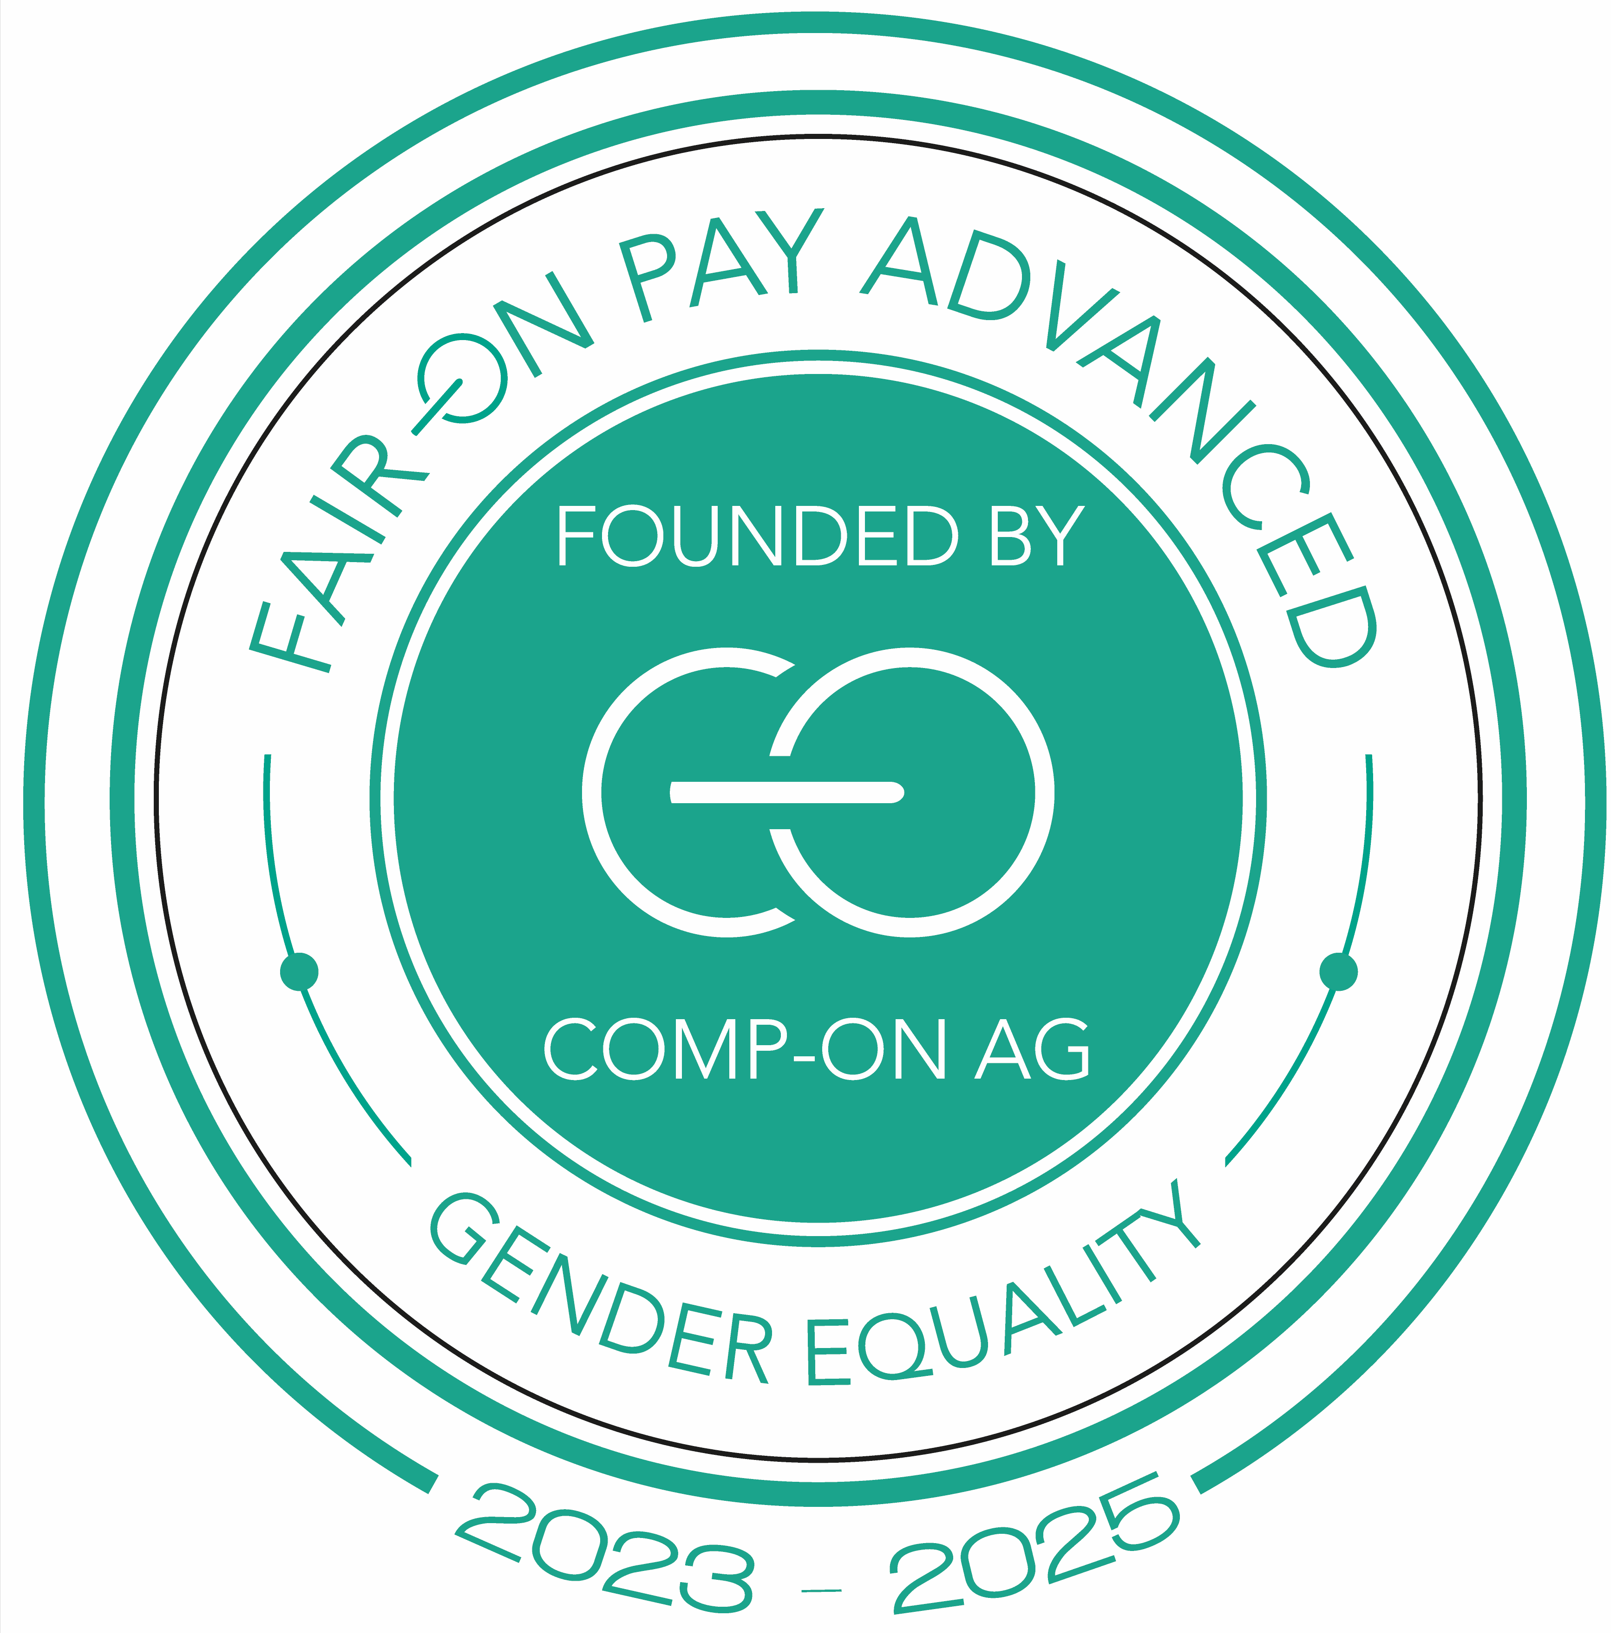 Fair on Pay - Gender Equality